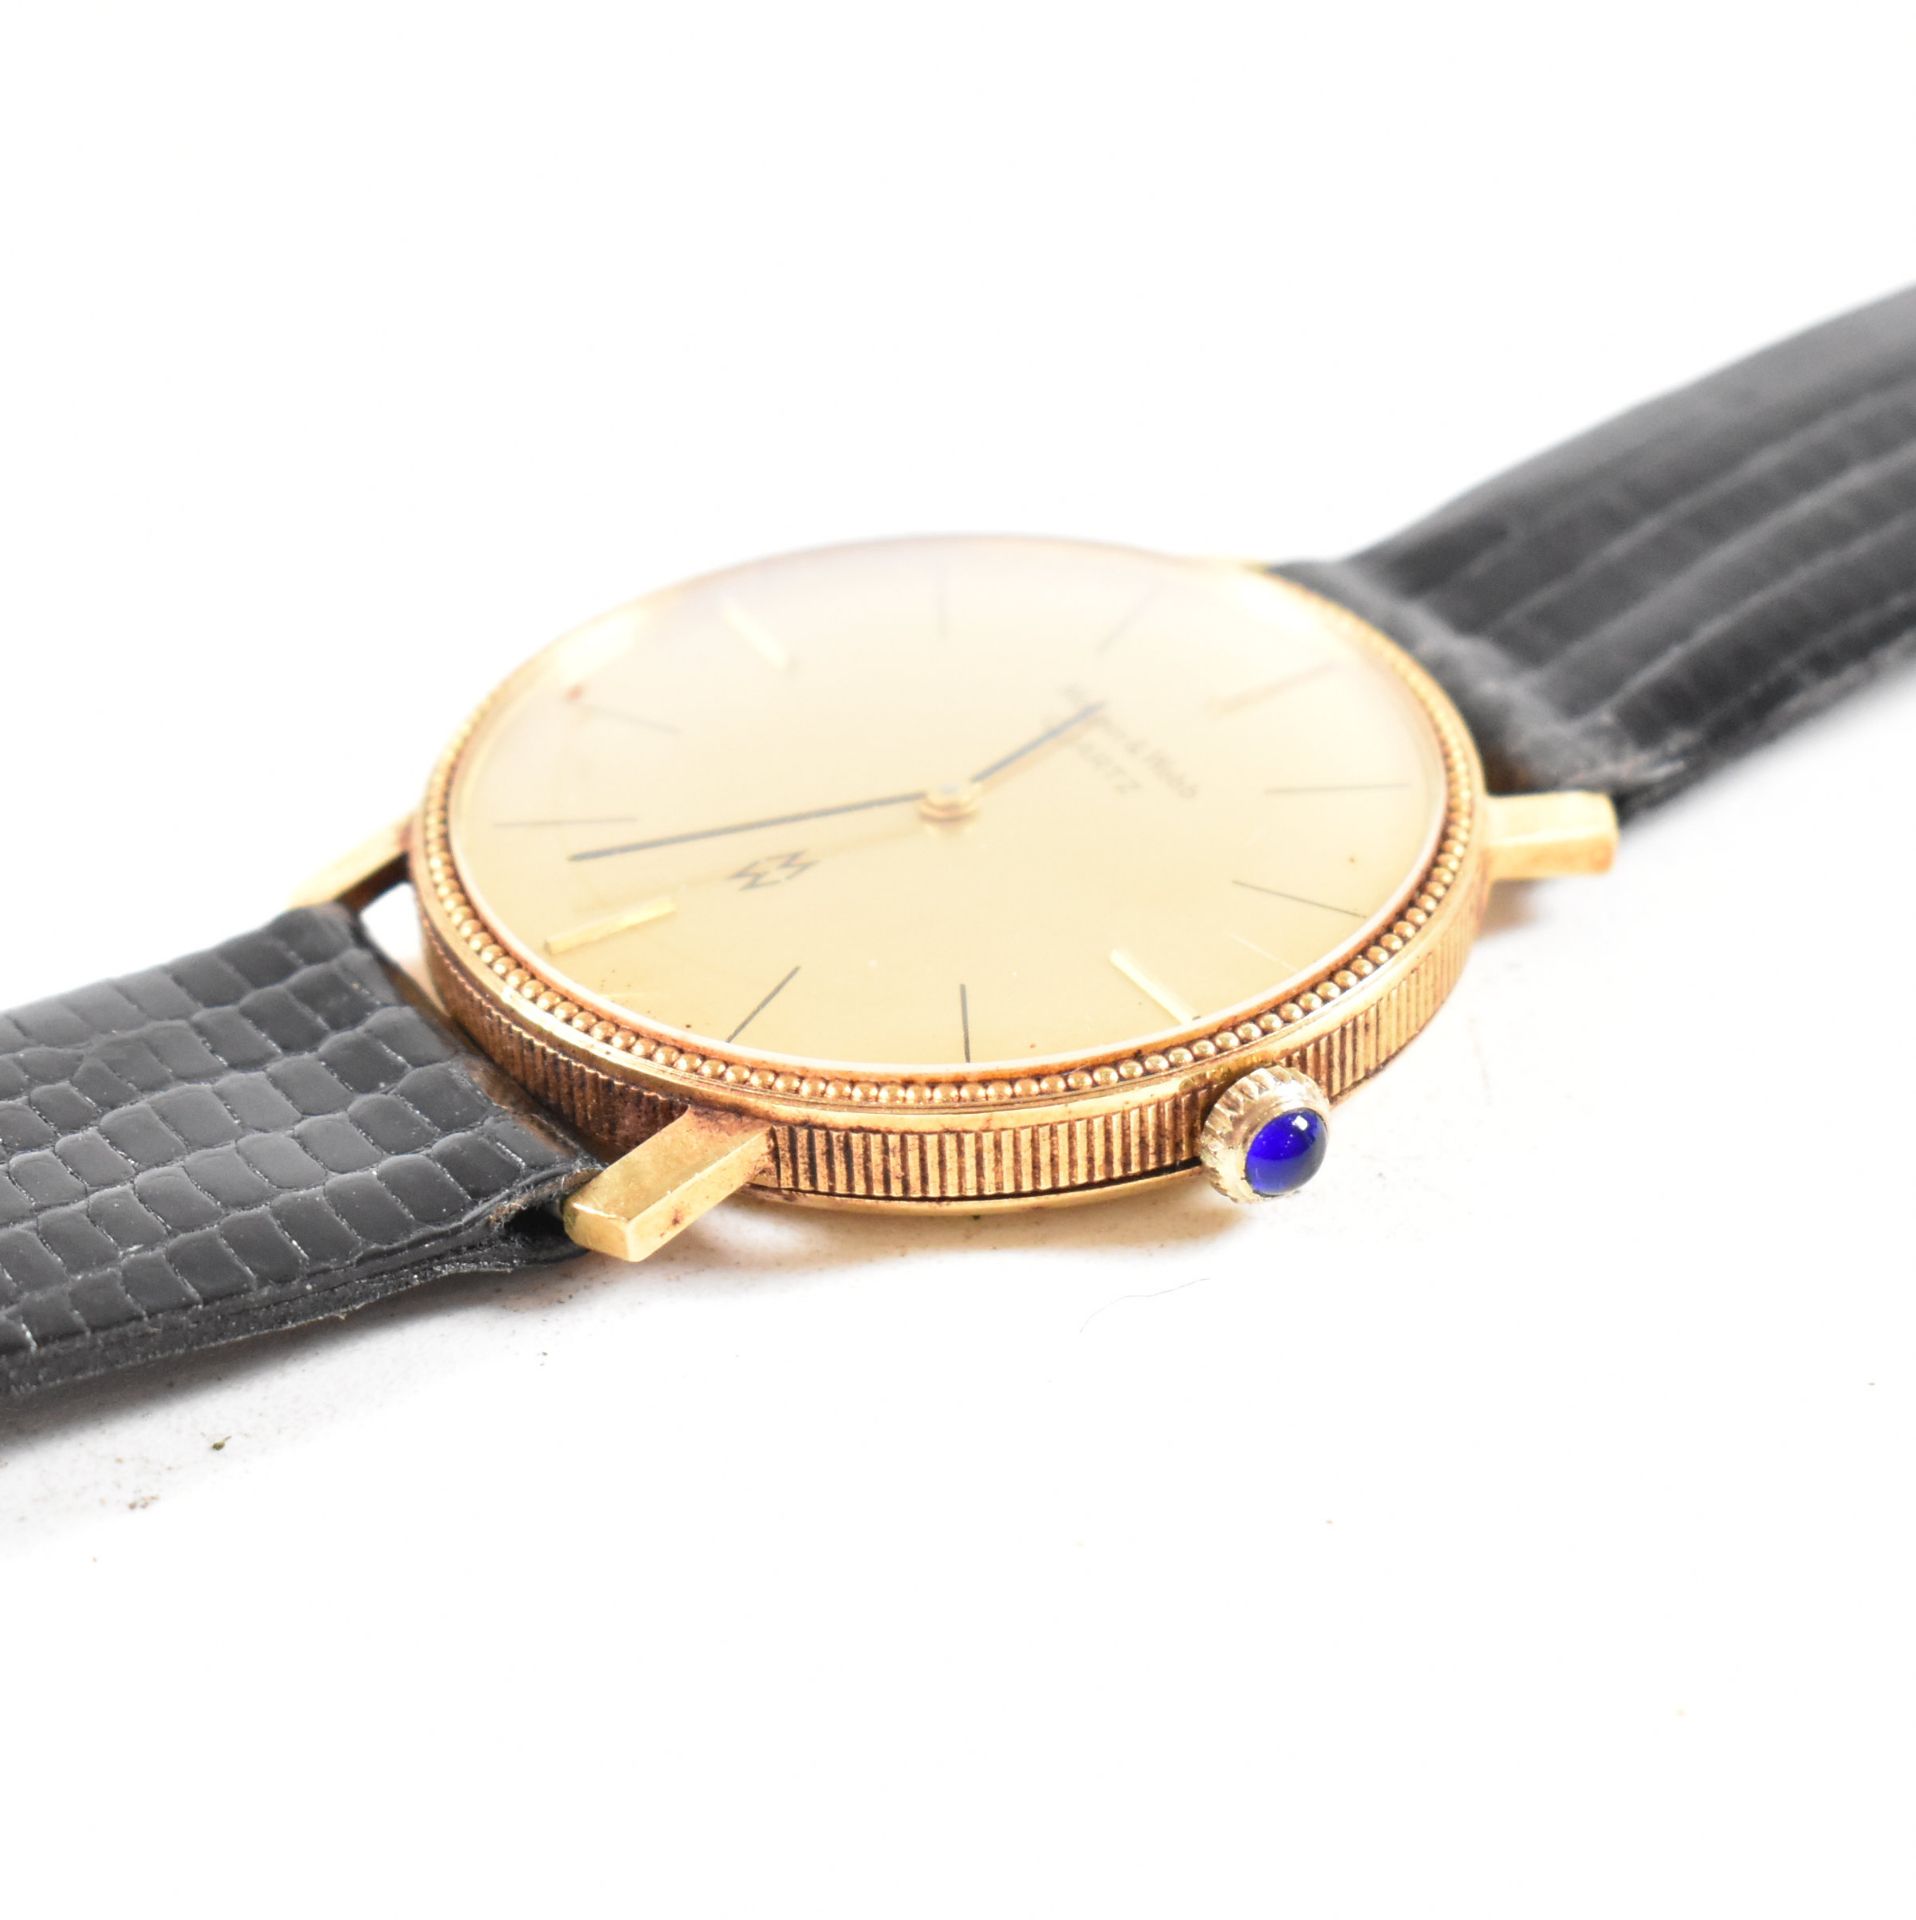 VINTAGE 18CT GOLD CASED MAPPIN & WEBB WRISTWATCH - Image 8 of 8